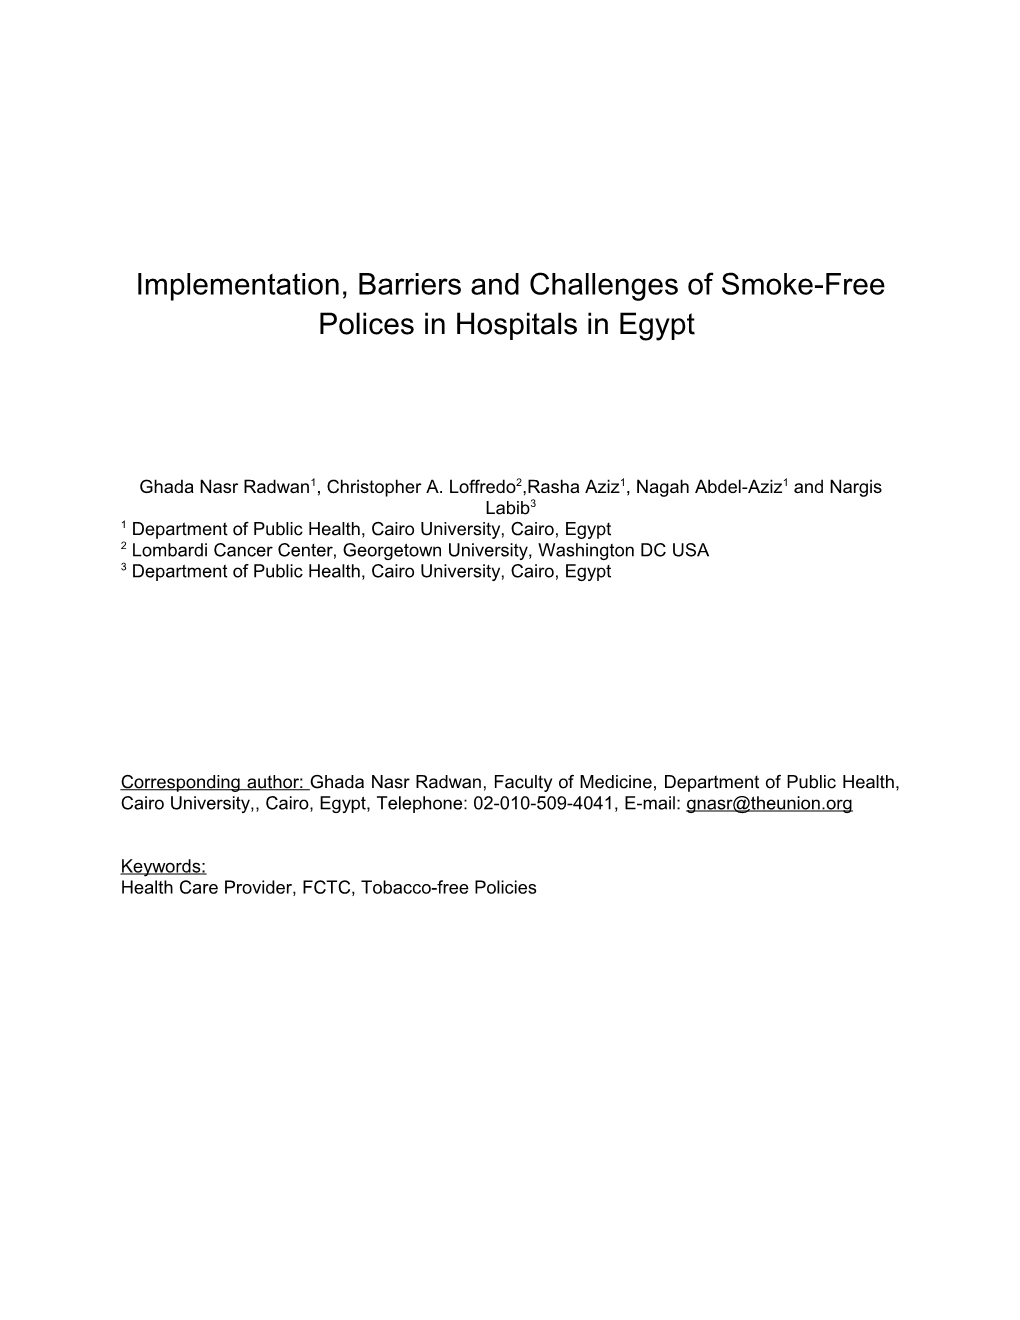 Implementation, Barriers and Challenges of Tobacco-Free Polices in Hospitals in Egypt